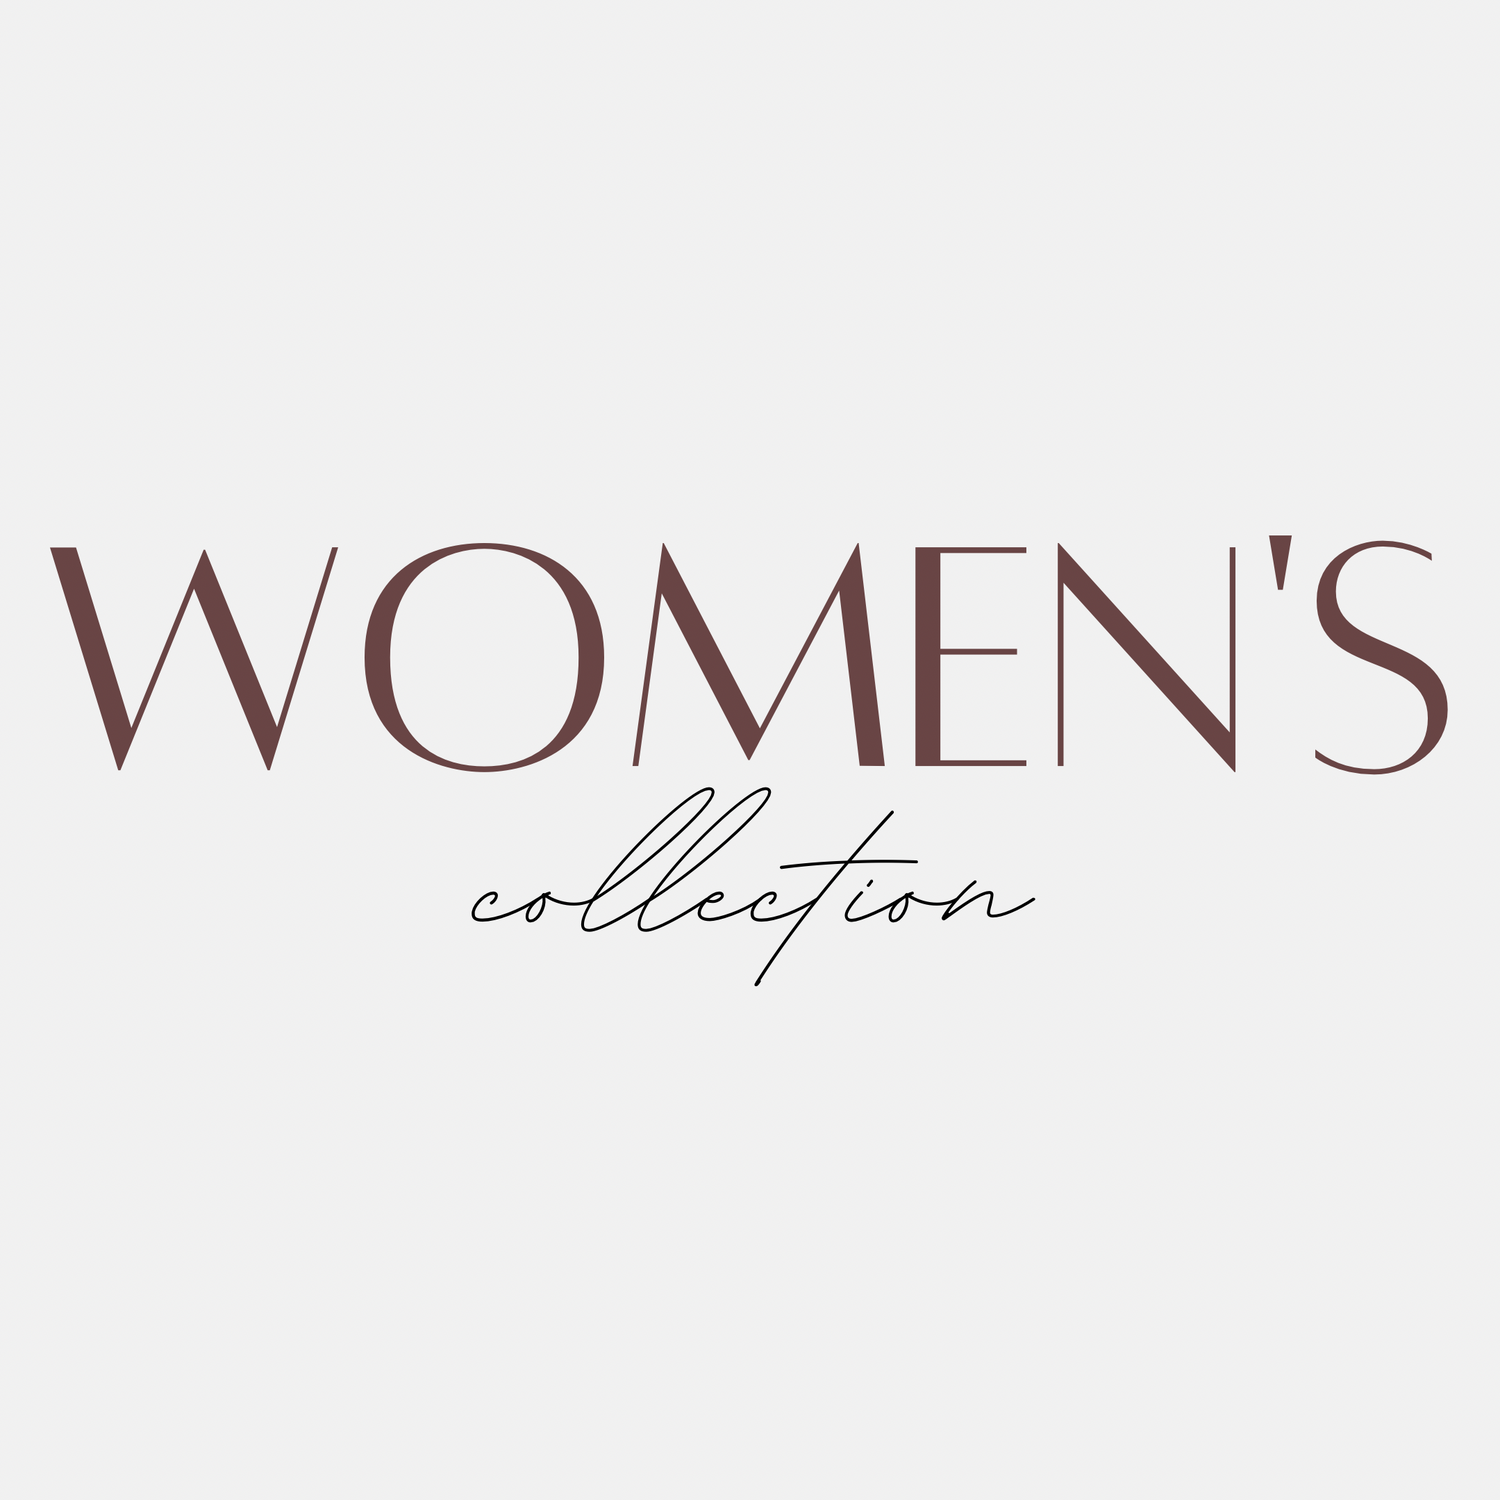 Women's Collection